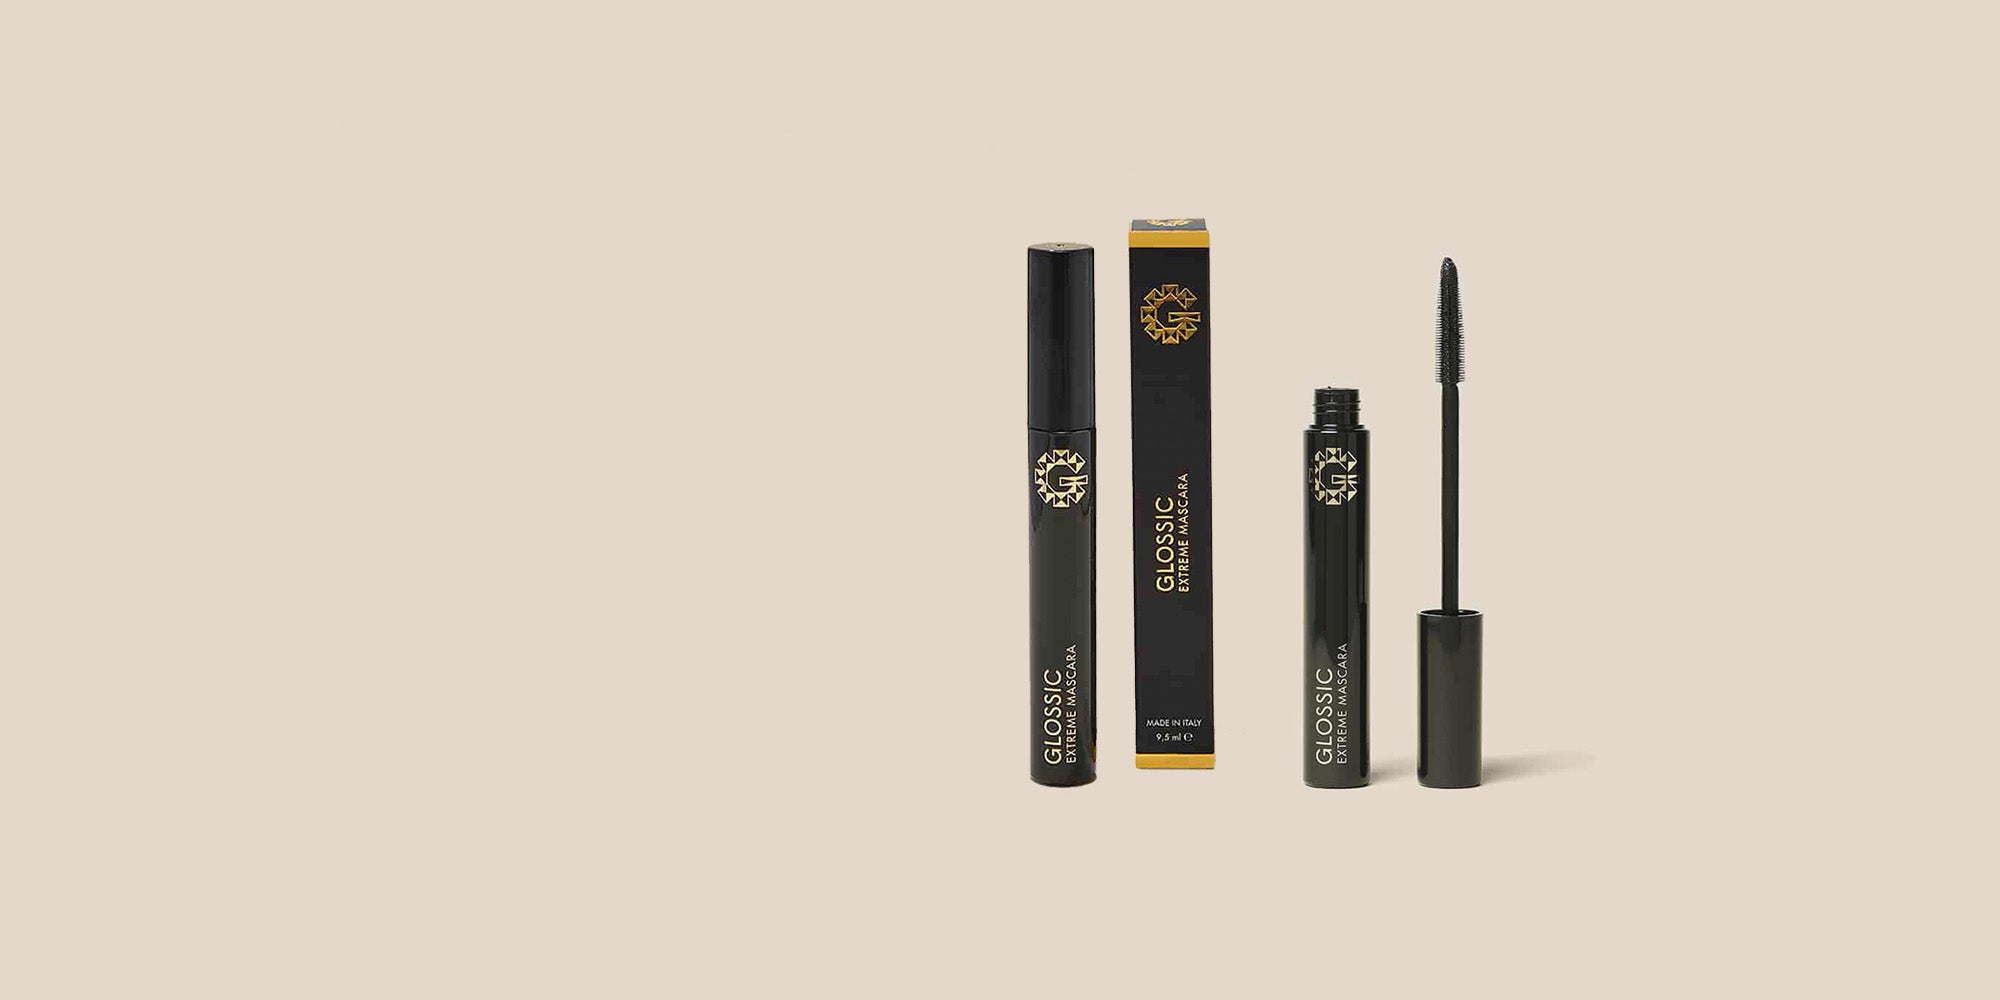 Lash perfect with the best mascara: Glossic's Extreme Mascara